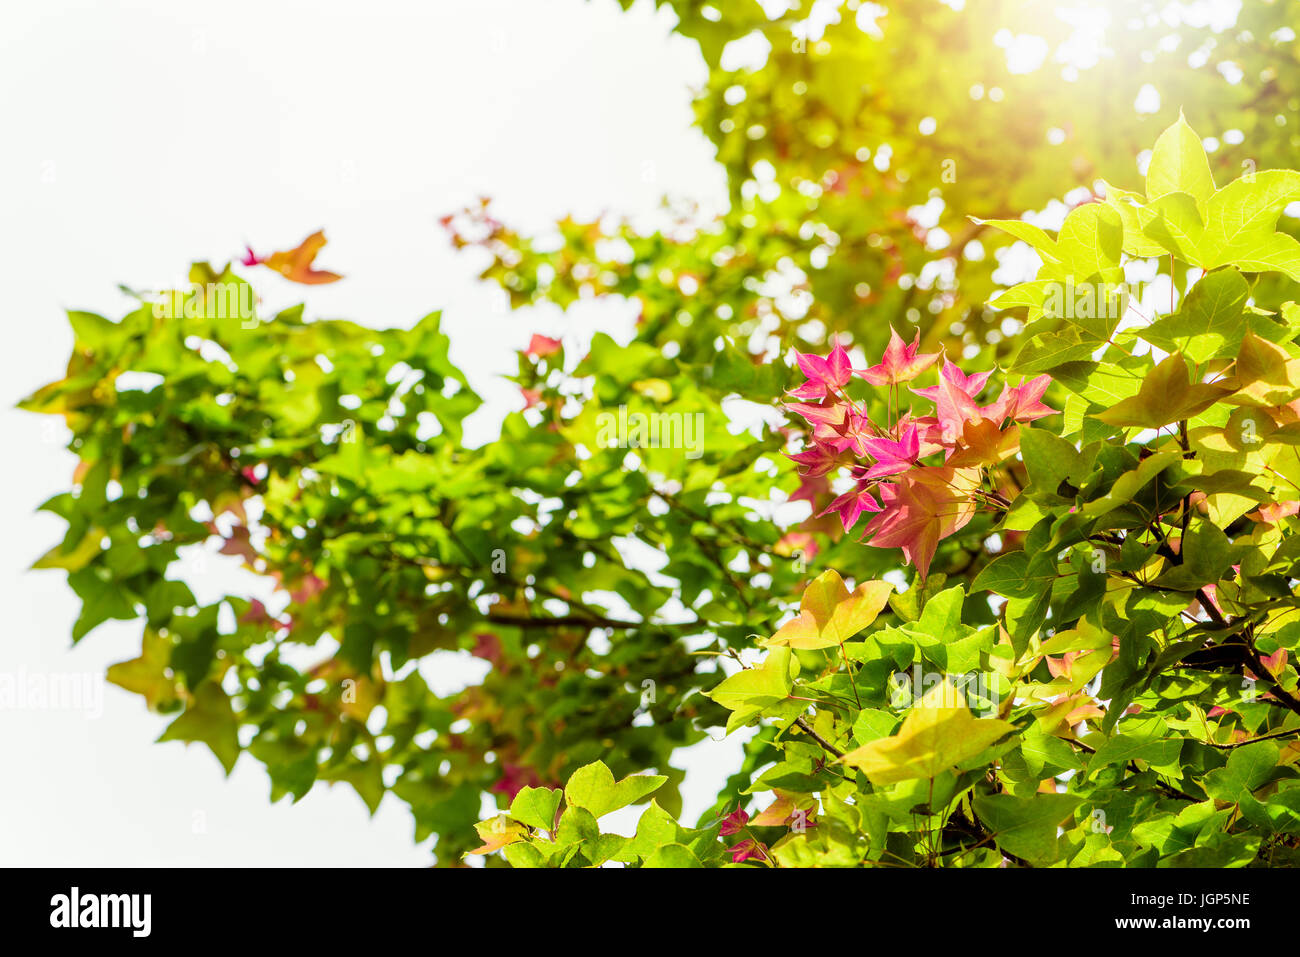 Red young leaves of Maple, Liquidambar formosana, Chinese sweet gum or Formosan gum on tree with sunlight are blossoming in spring background, Thailan Stock Photo